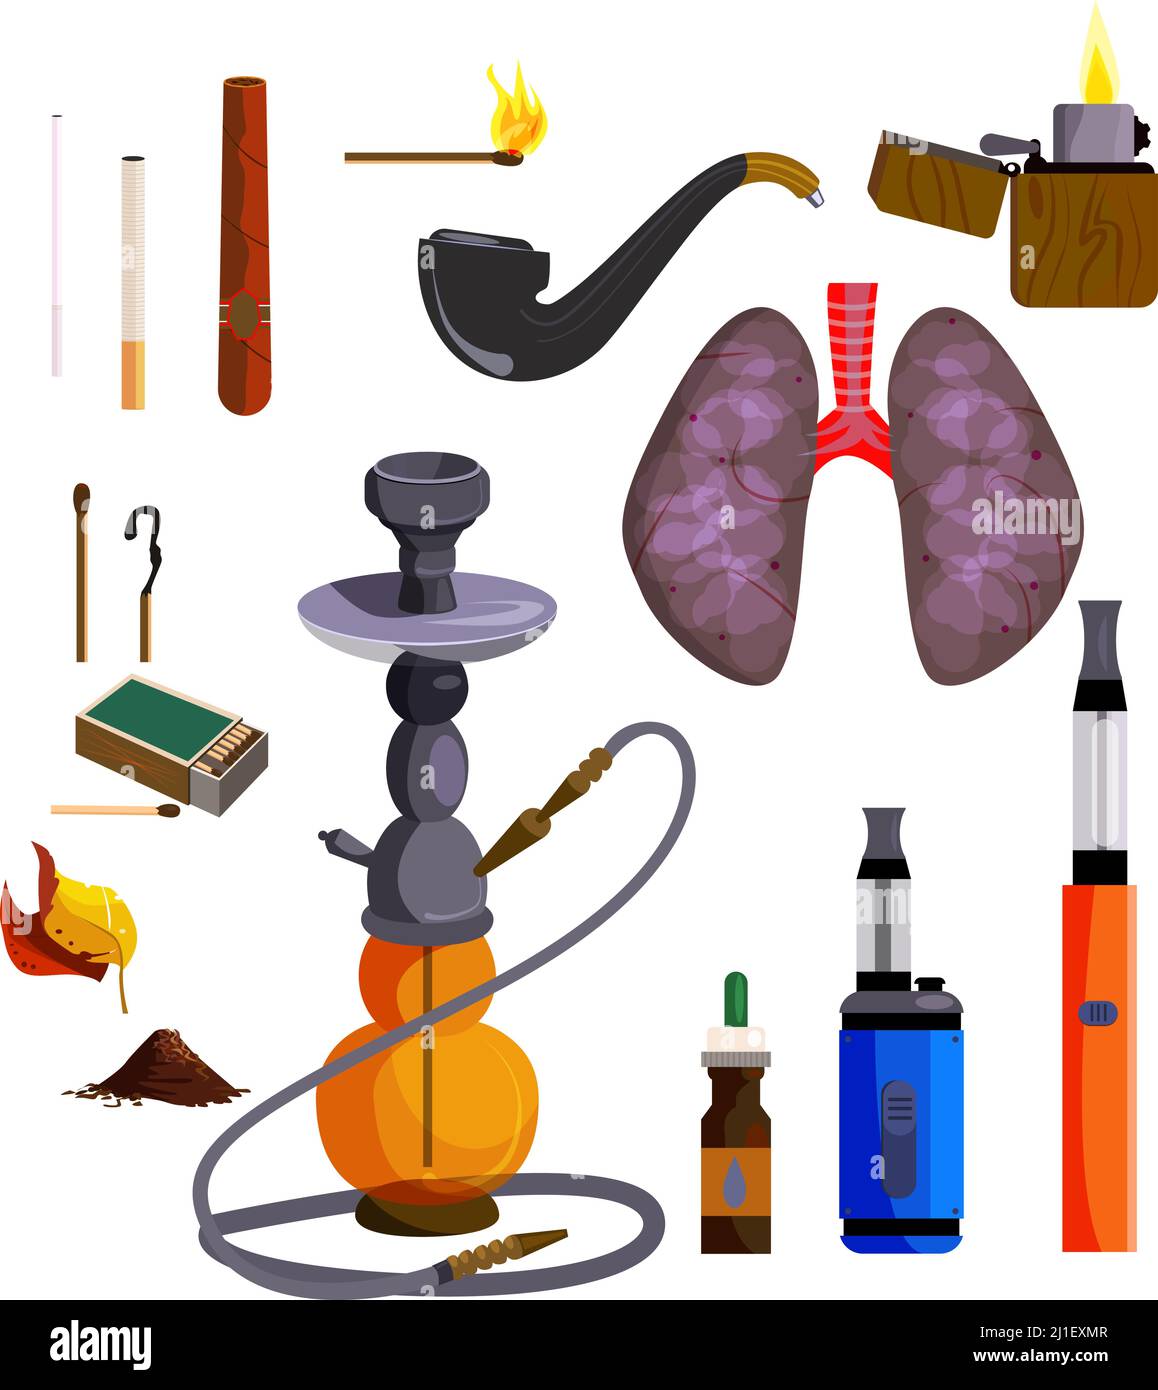 Smoking devices icons set. Vector icons collection on white background, Hookah, lungs, cigar, cigarette. Smoking concept. Illustration can be used for Stock Vector